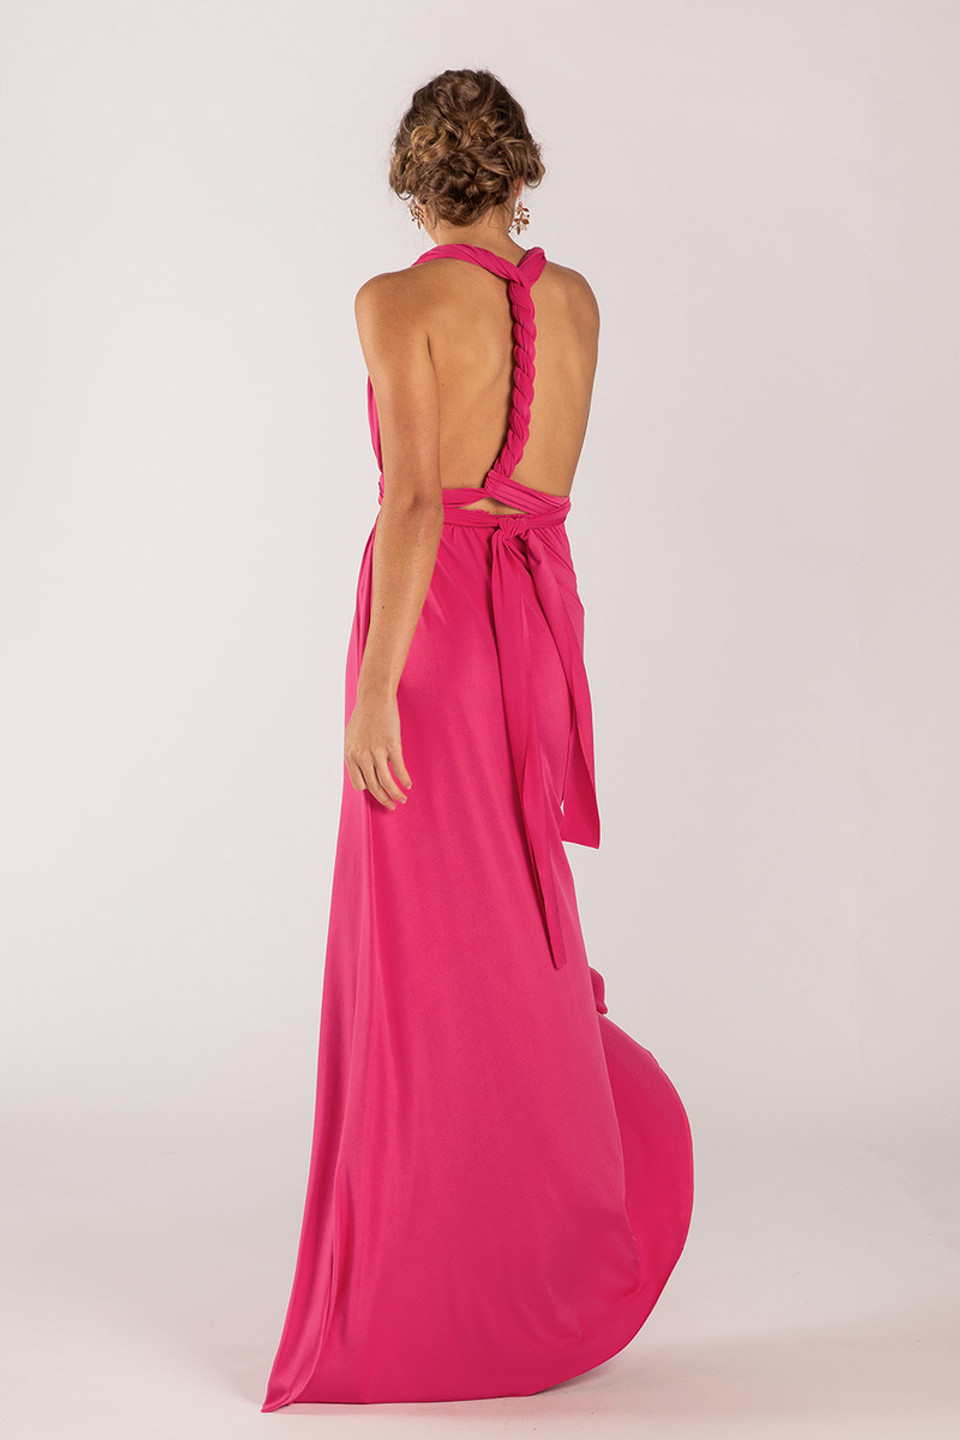 Classic Multiway Infinity Bridesmaid Dress in Hot Pink For Sale ...